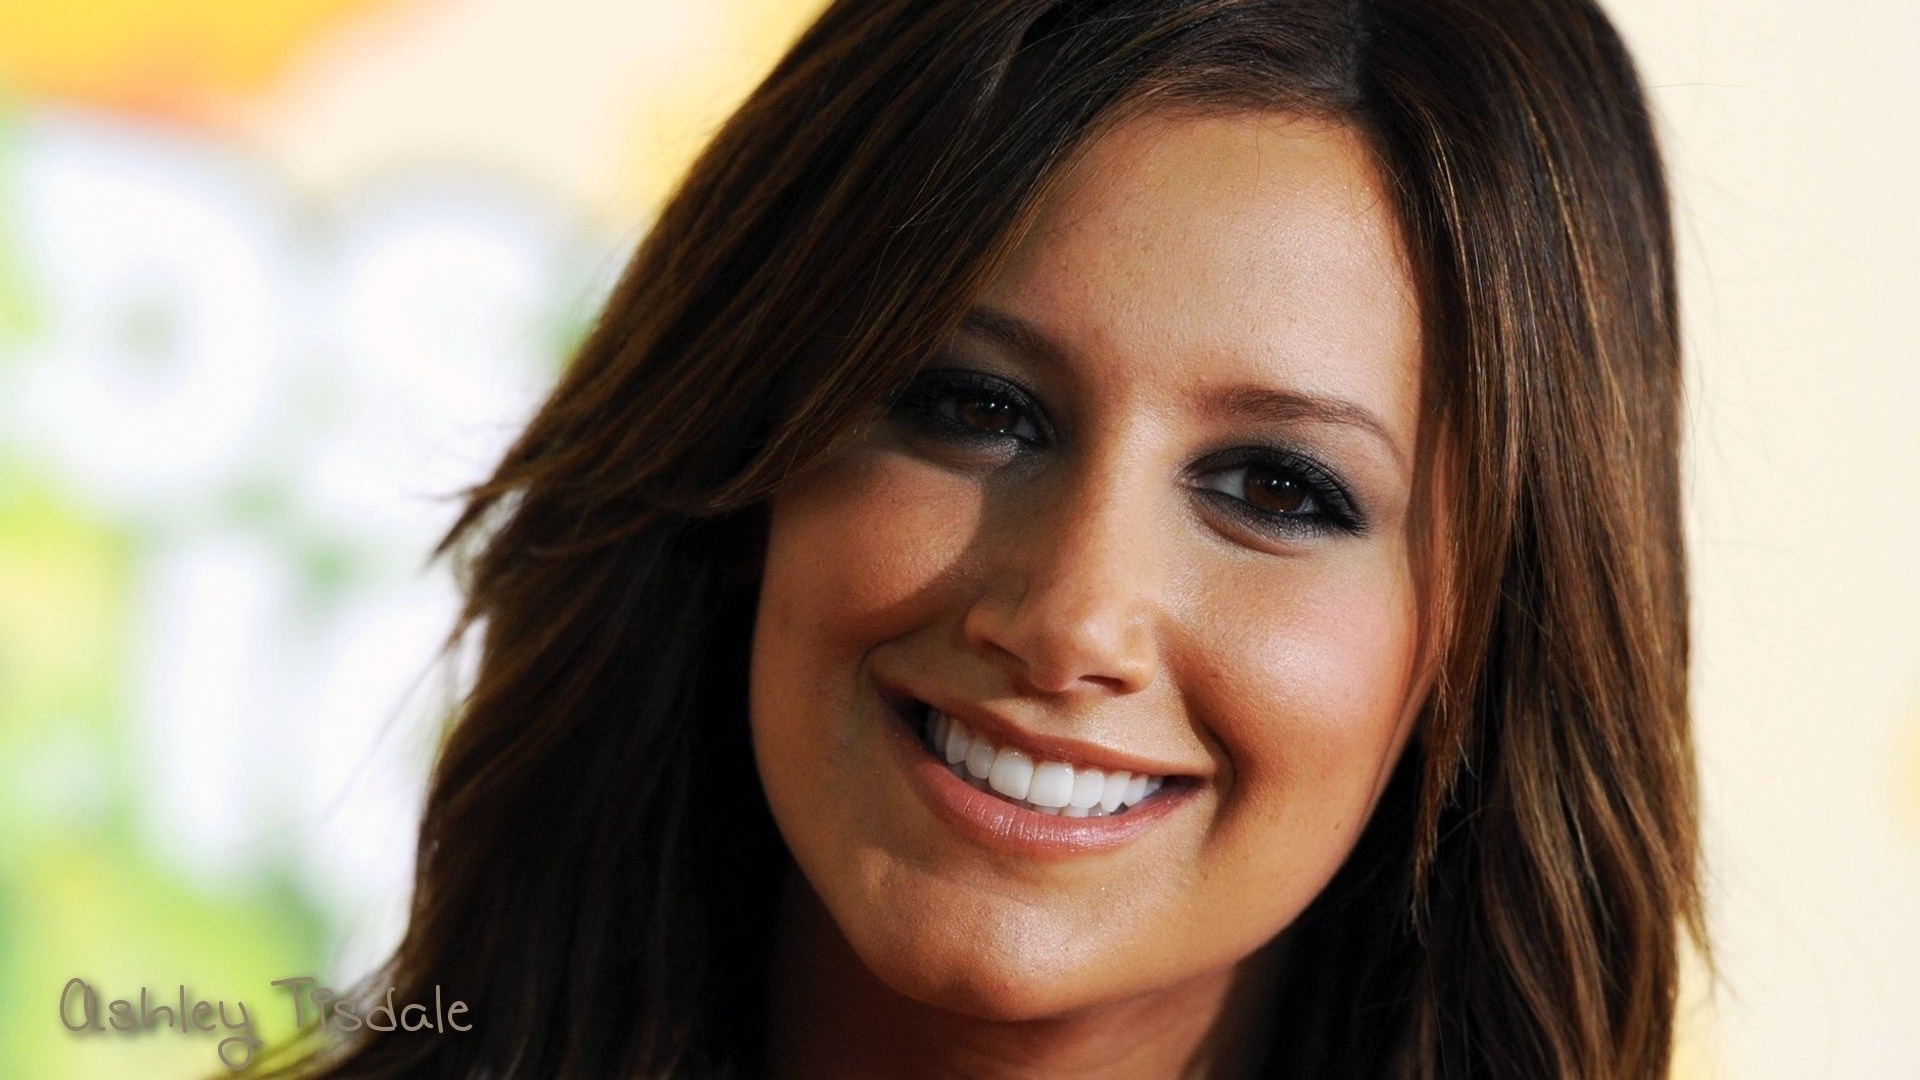 Ashley Tisdale #083 - 1920x1080 Wallpapers Pictures Photos Images